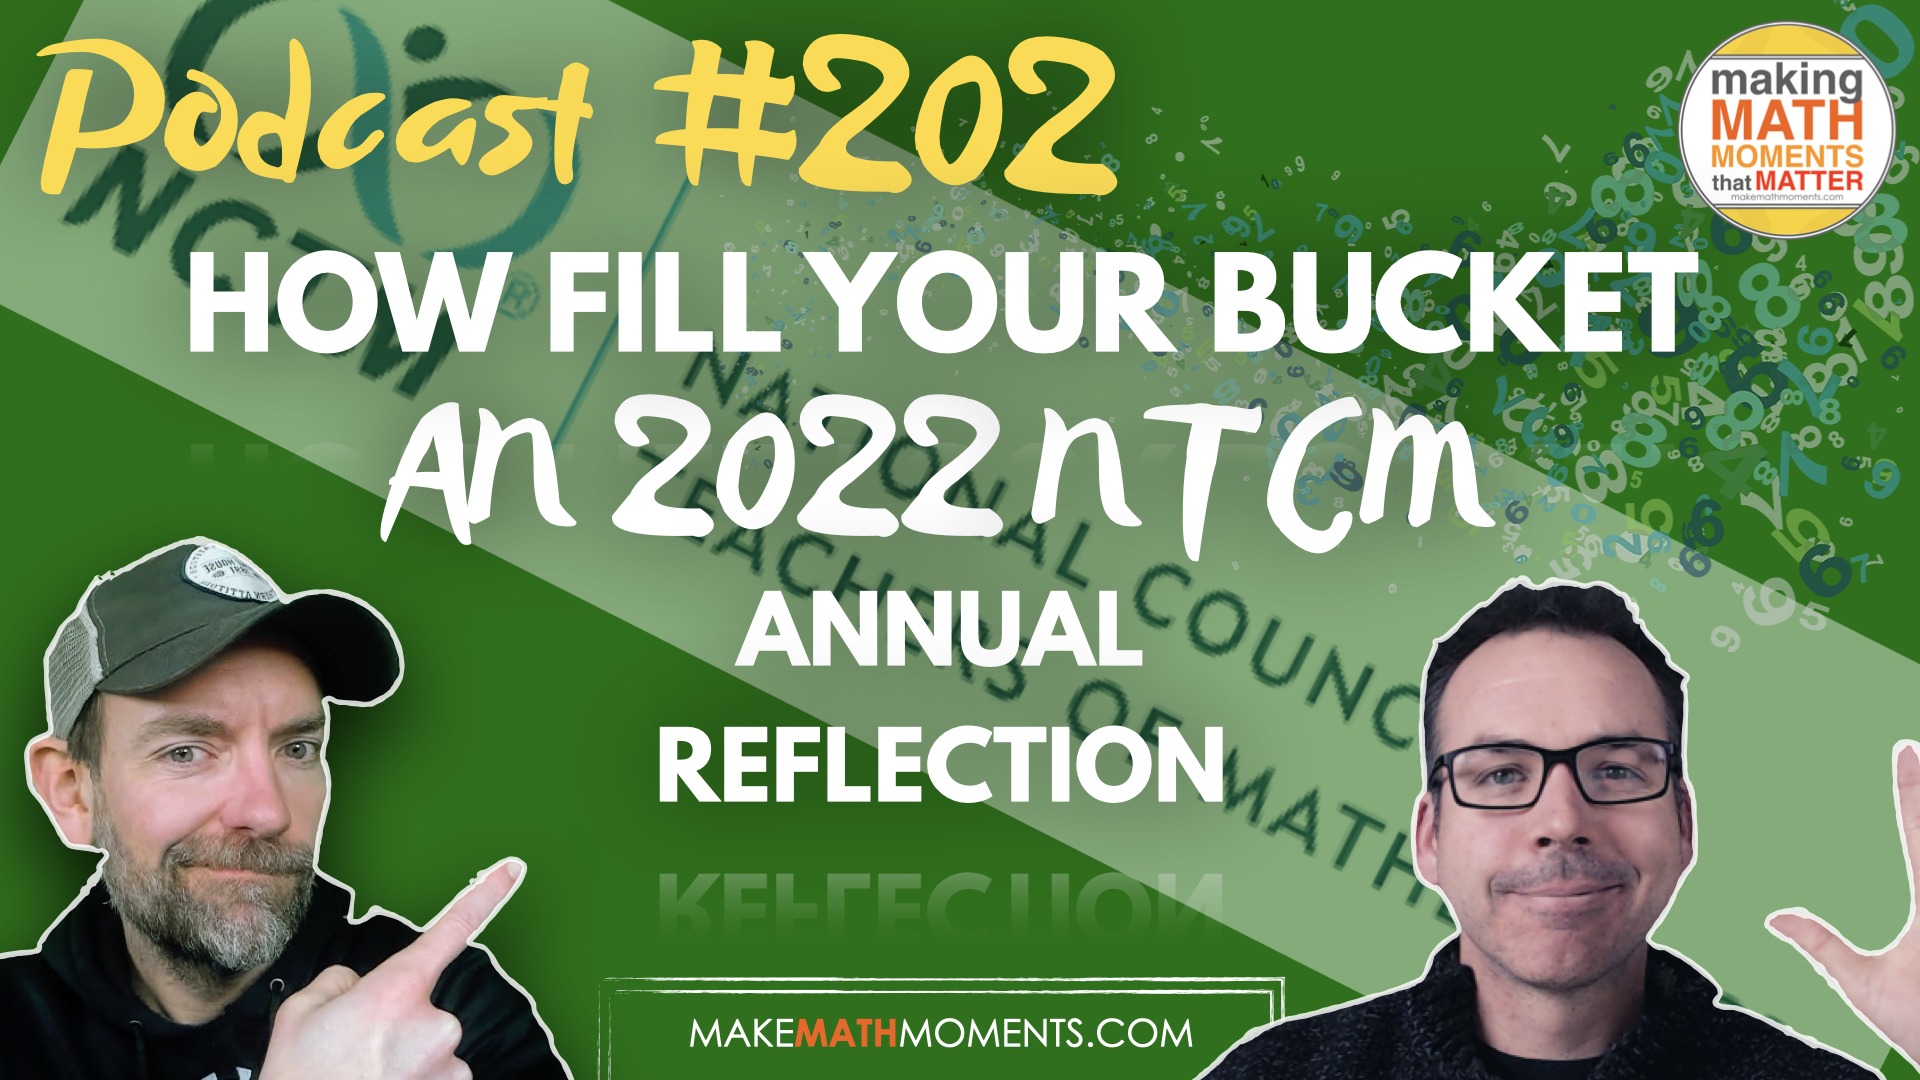 Episode 202: How To Fill Your Bucket – An 2022 NCTM Annual Reflection